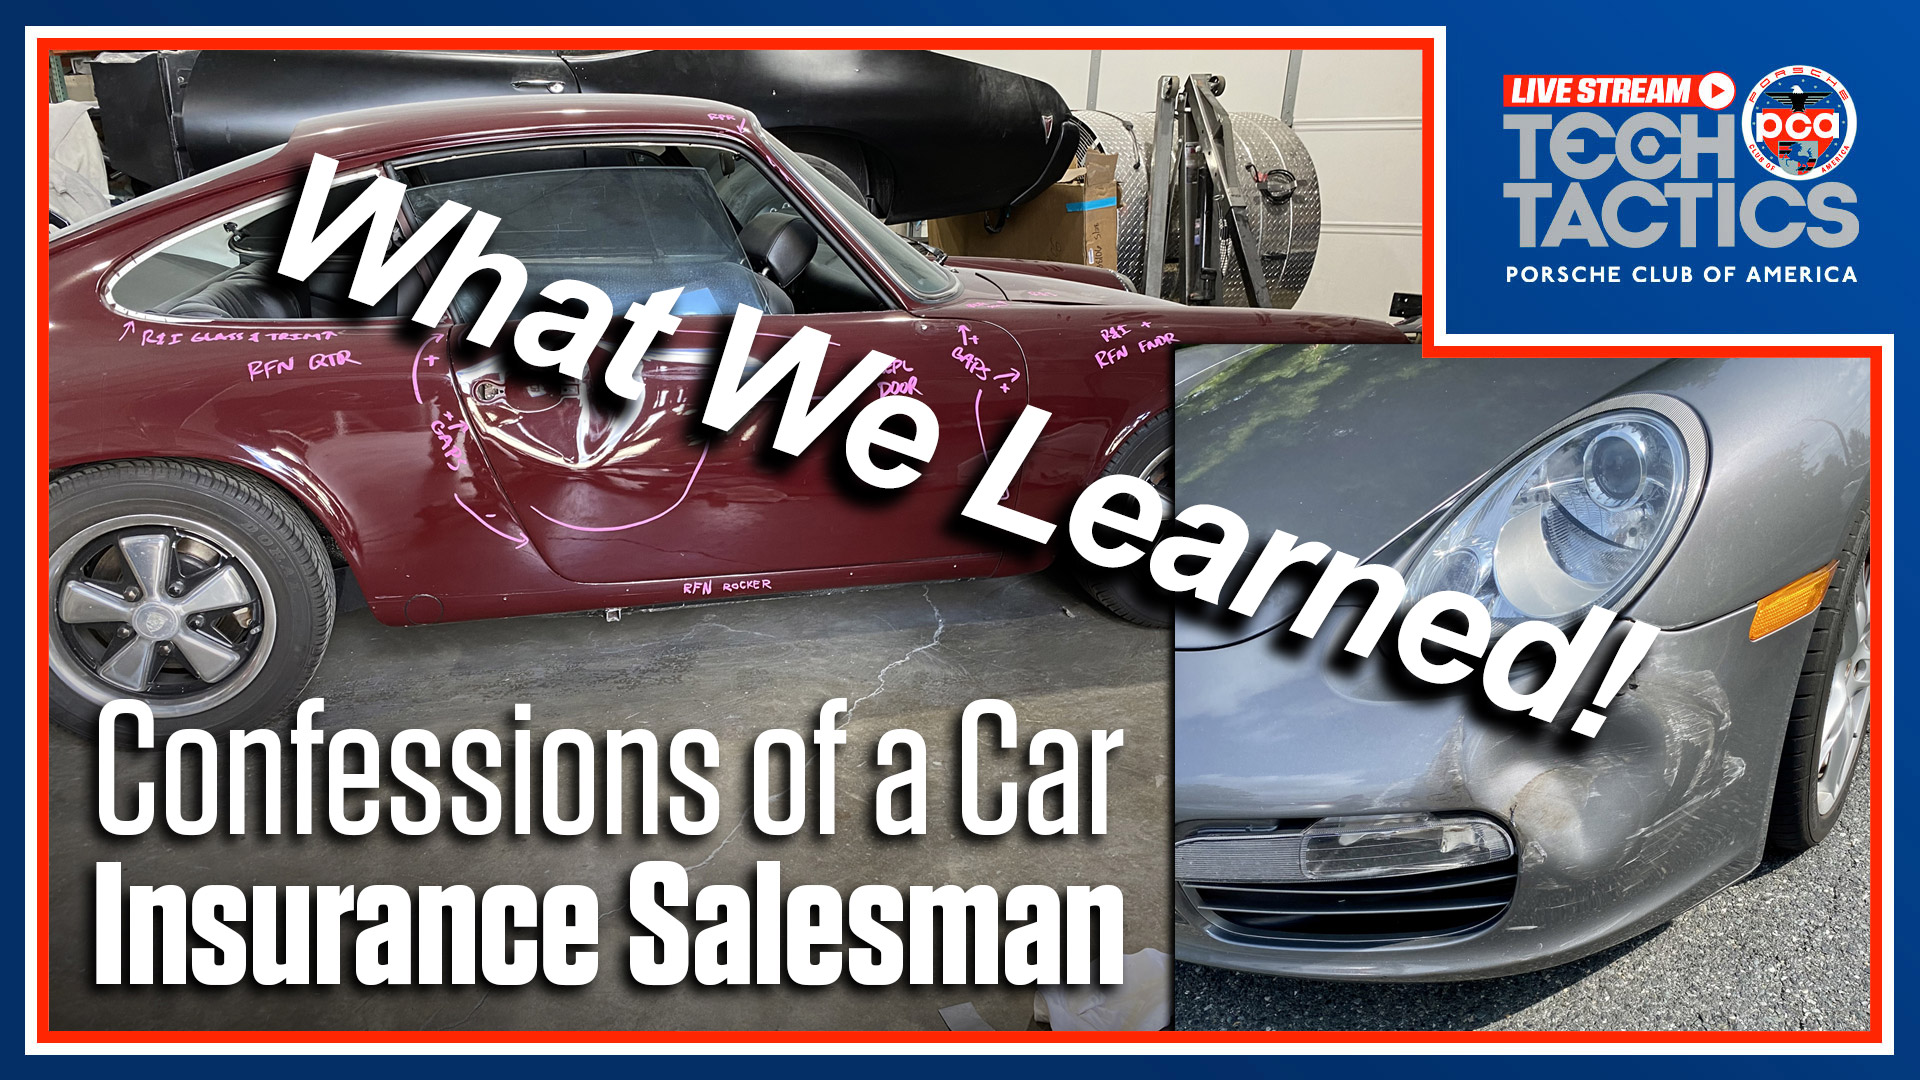 Porsche Club of America - 11 Things We Learned About Car Insurance on Tech Tactics Live